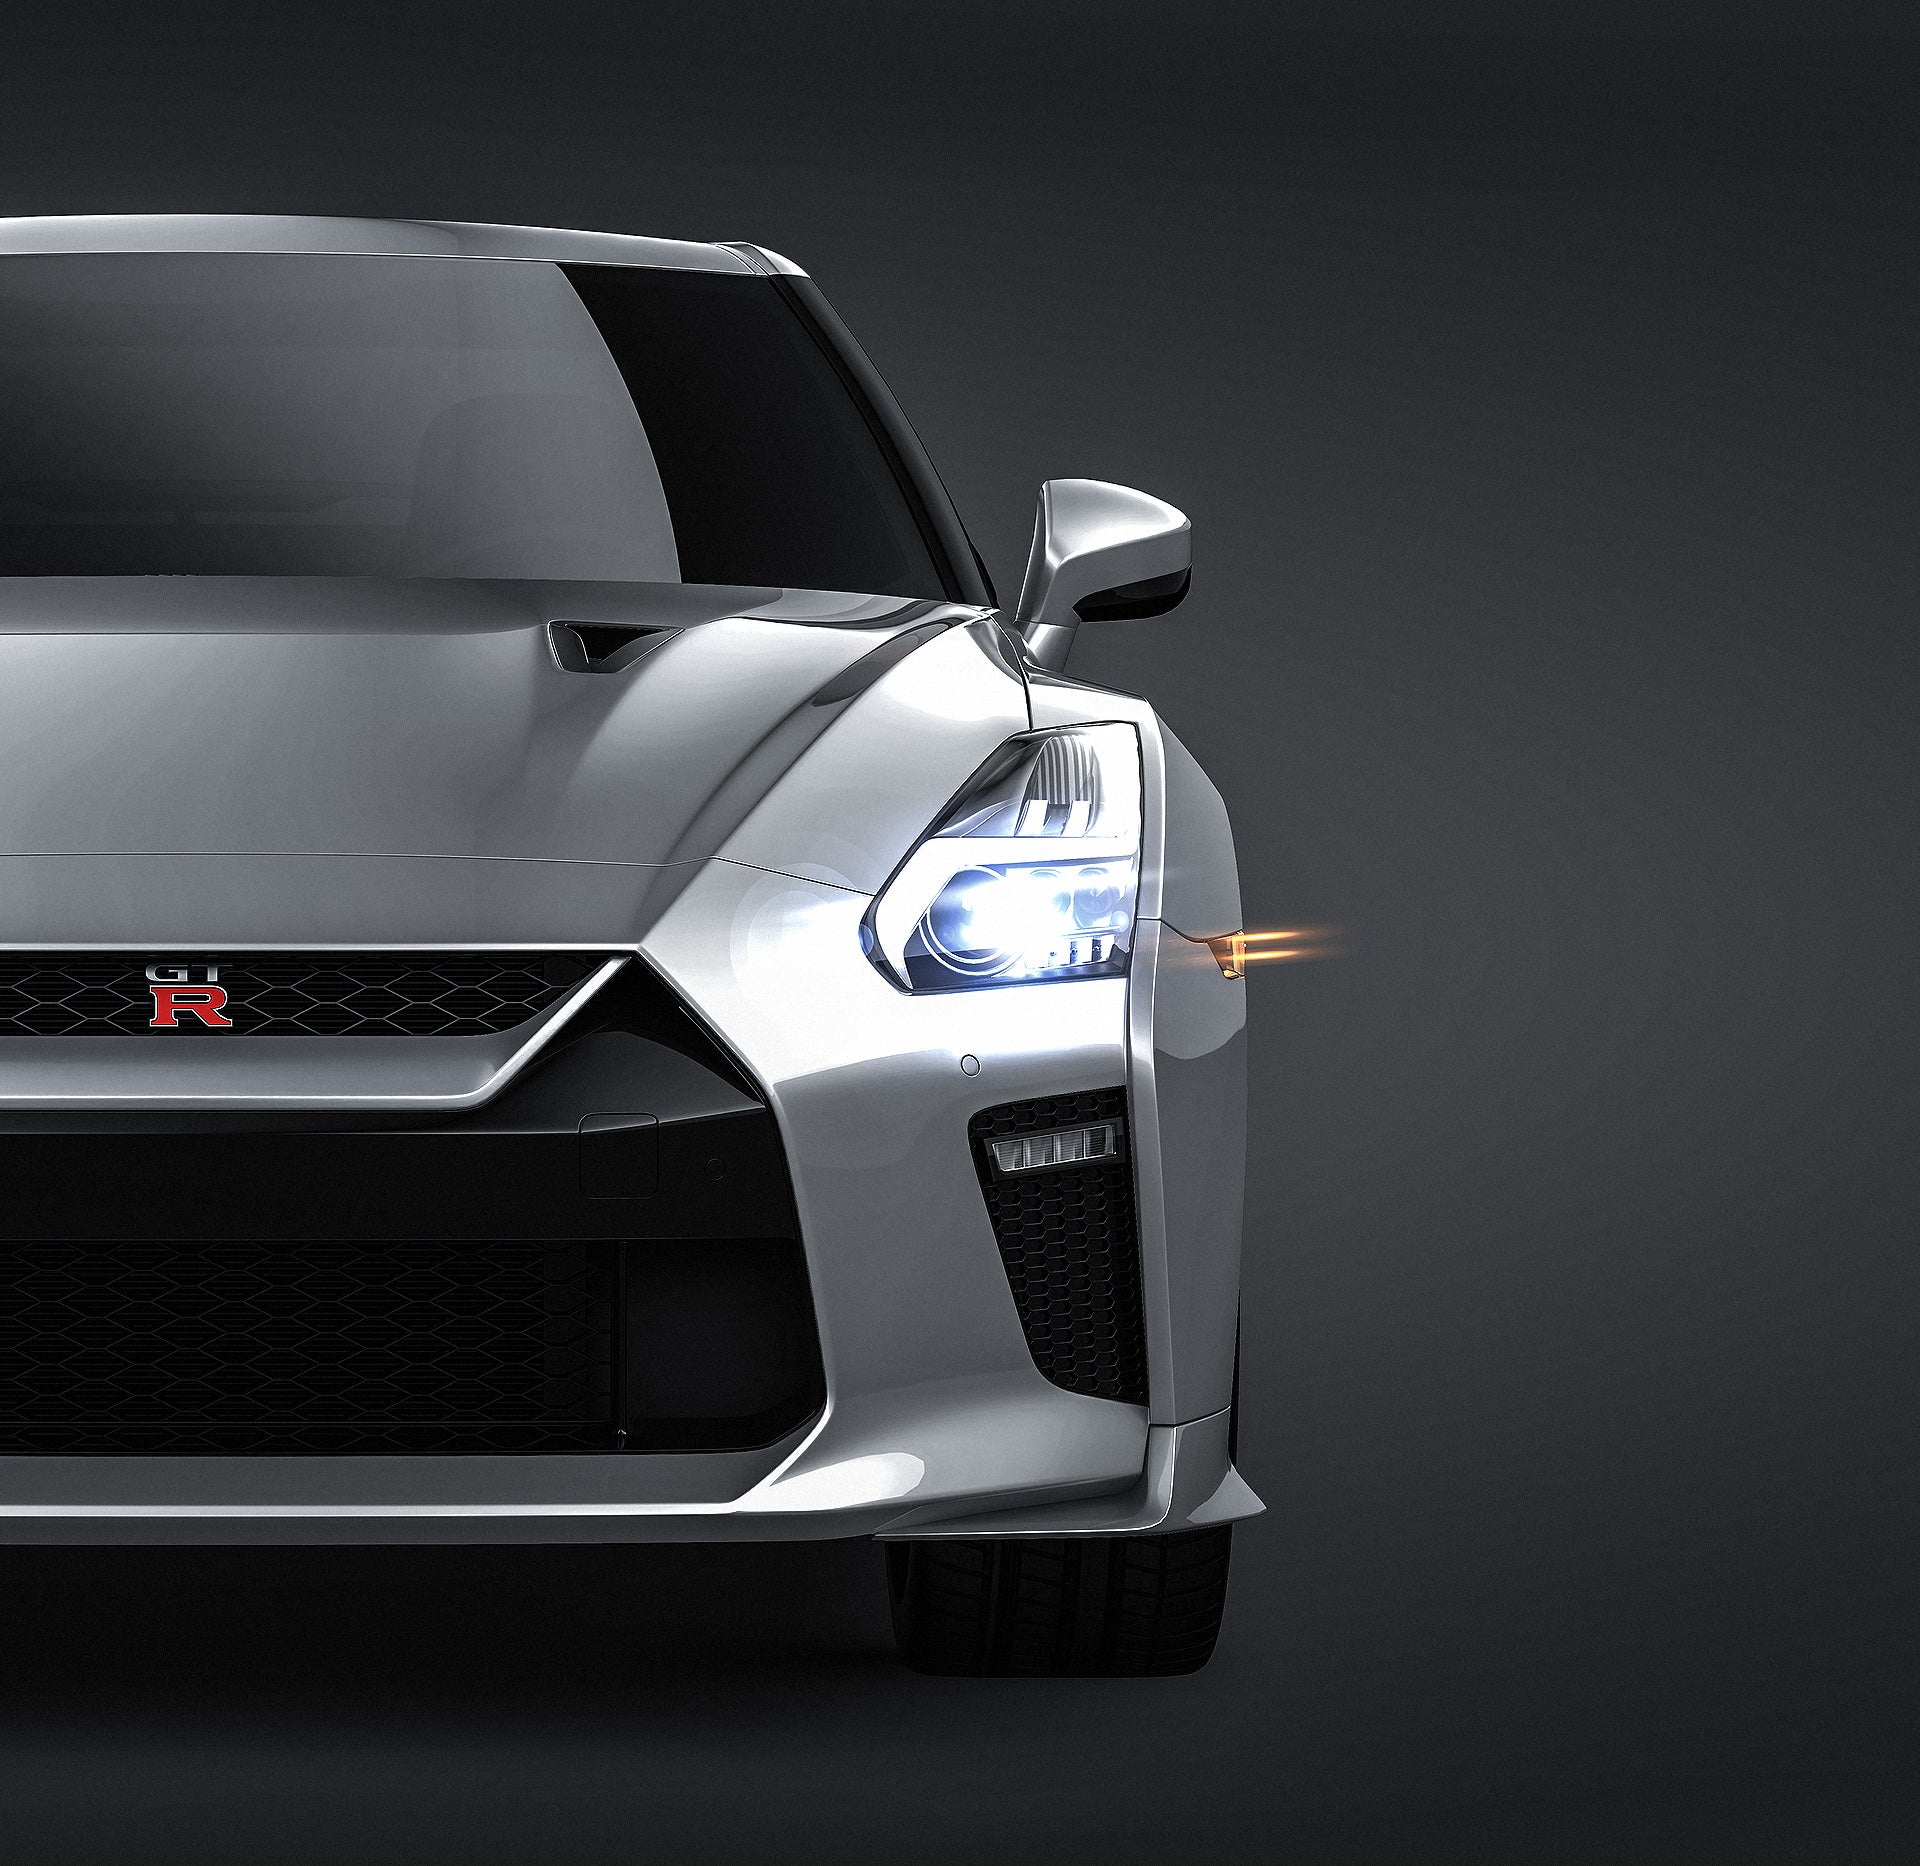 Nissan GT-R 2018 glossy finish - all sides Car Mockup Template.psd